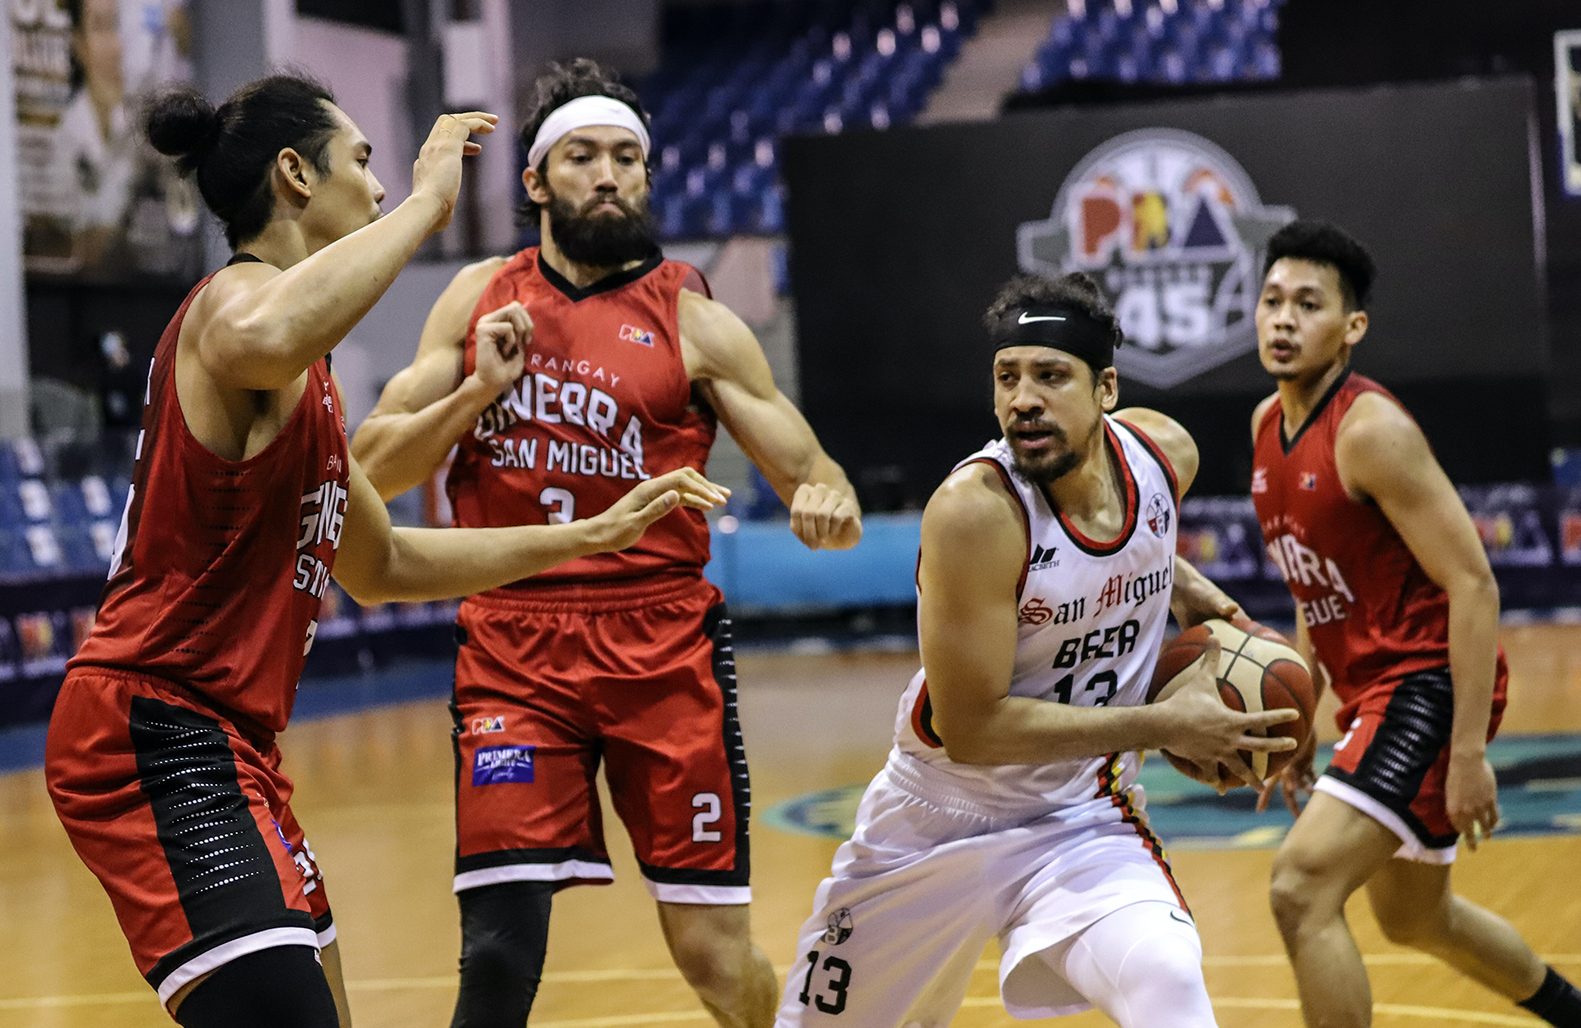 San Miguel rips Ginebra to get back on winning track